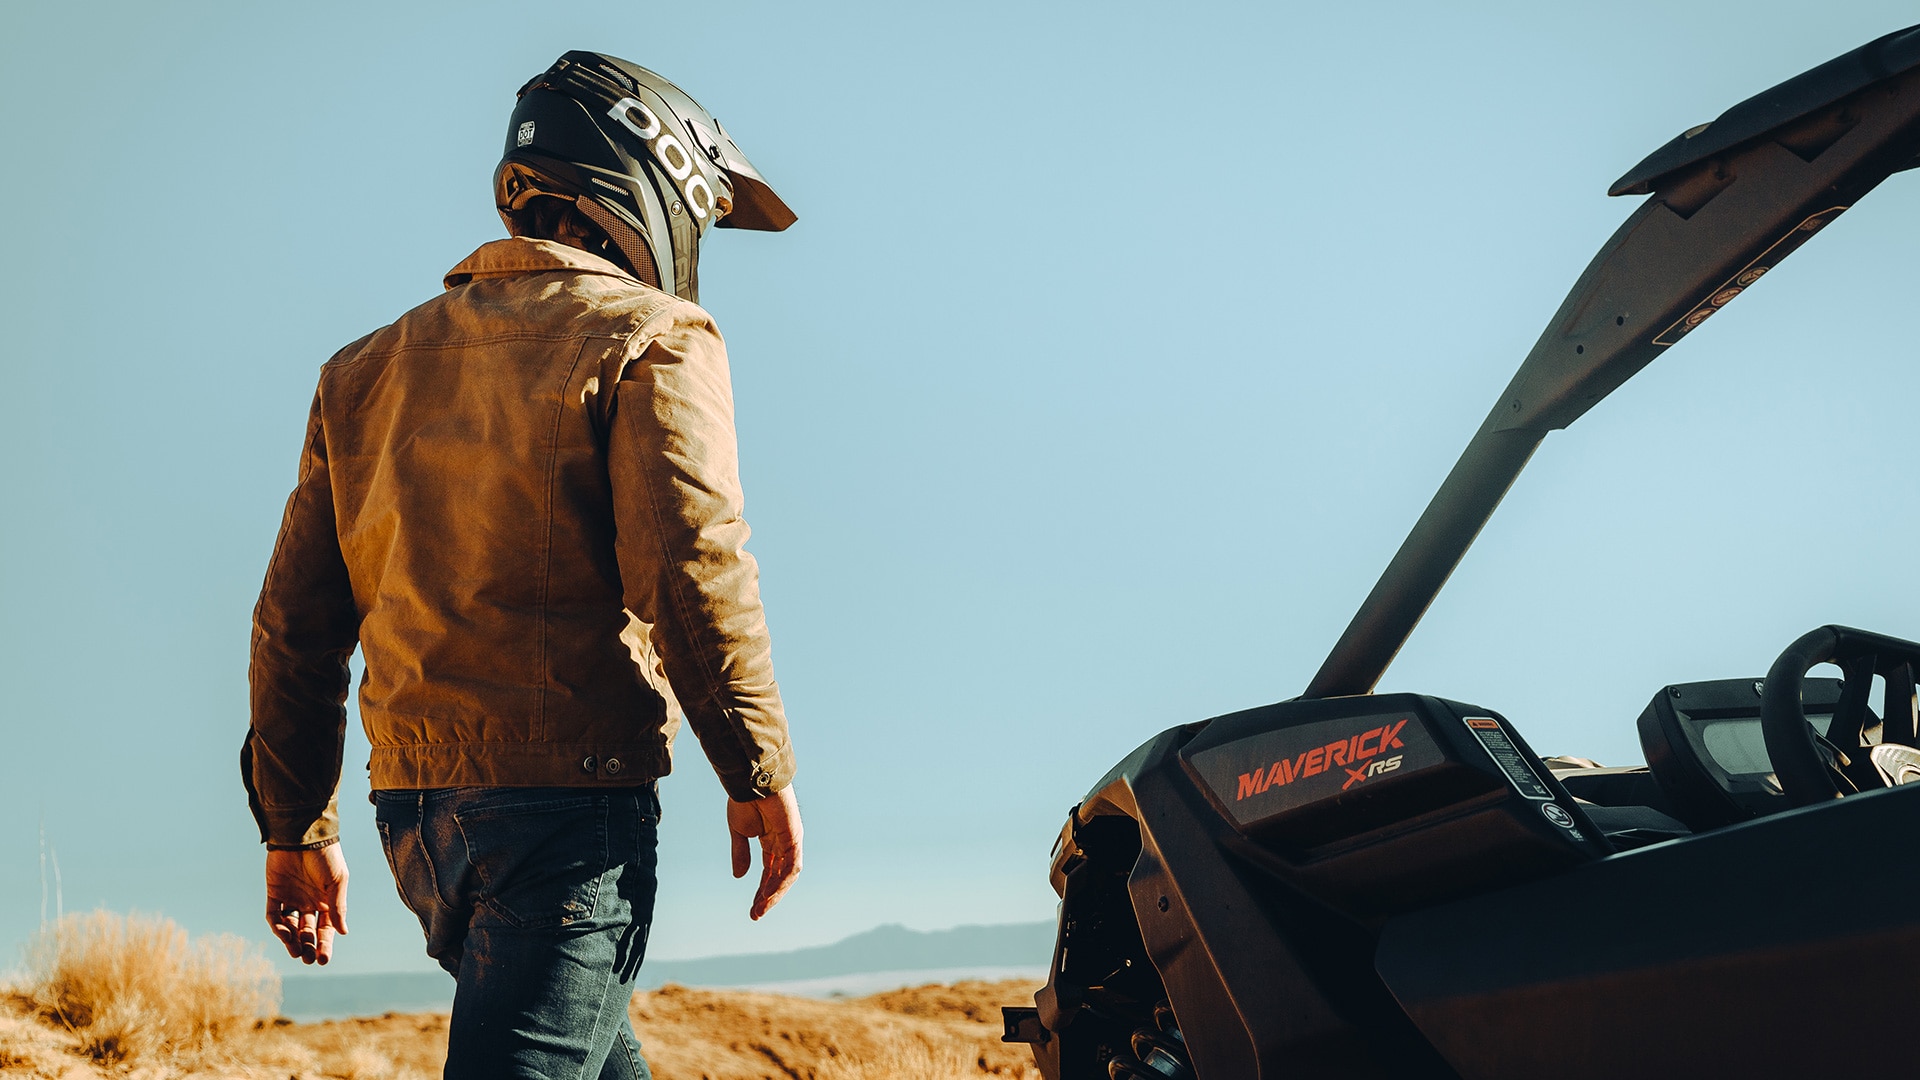 Do you need a license to ride a Can-Am Off-Road vehicle?